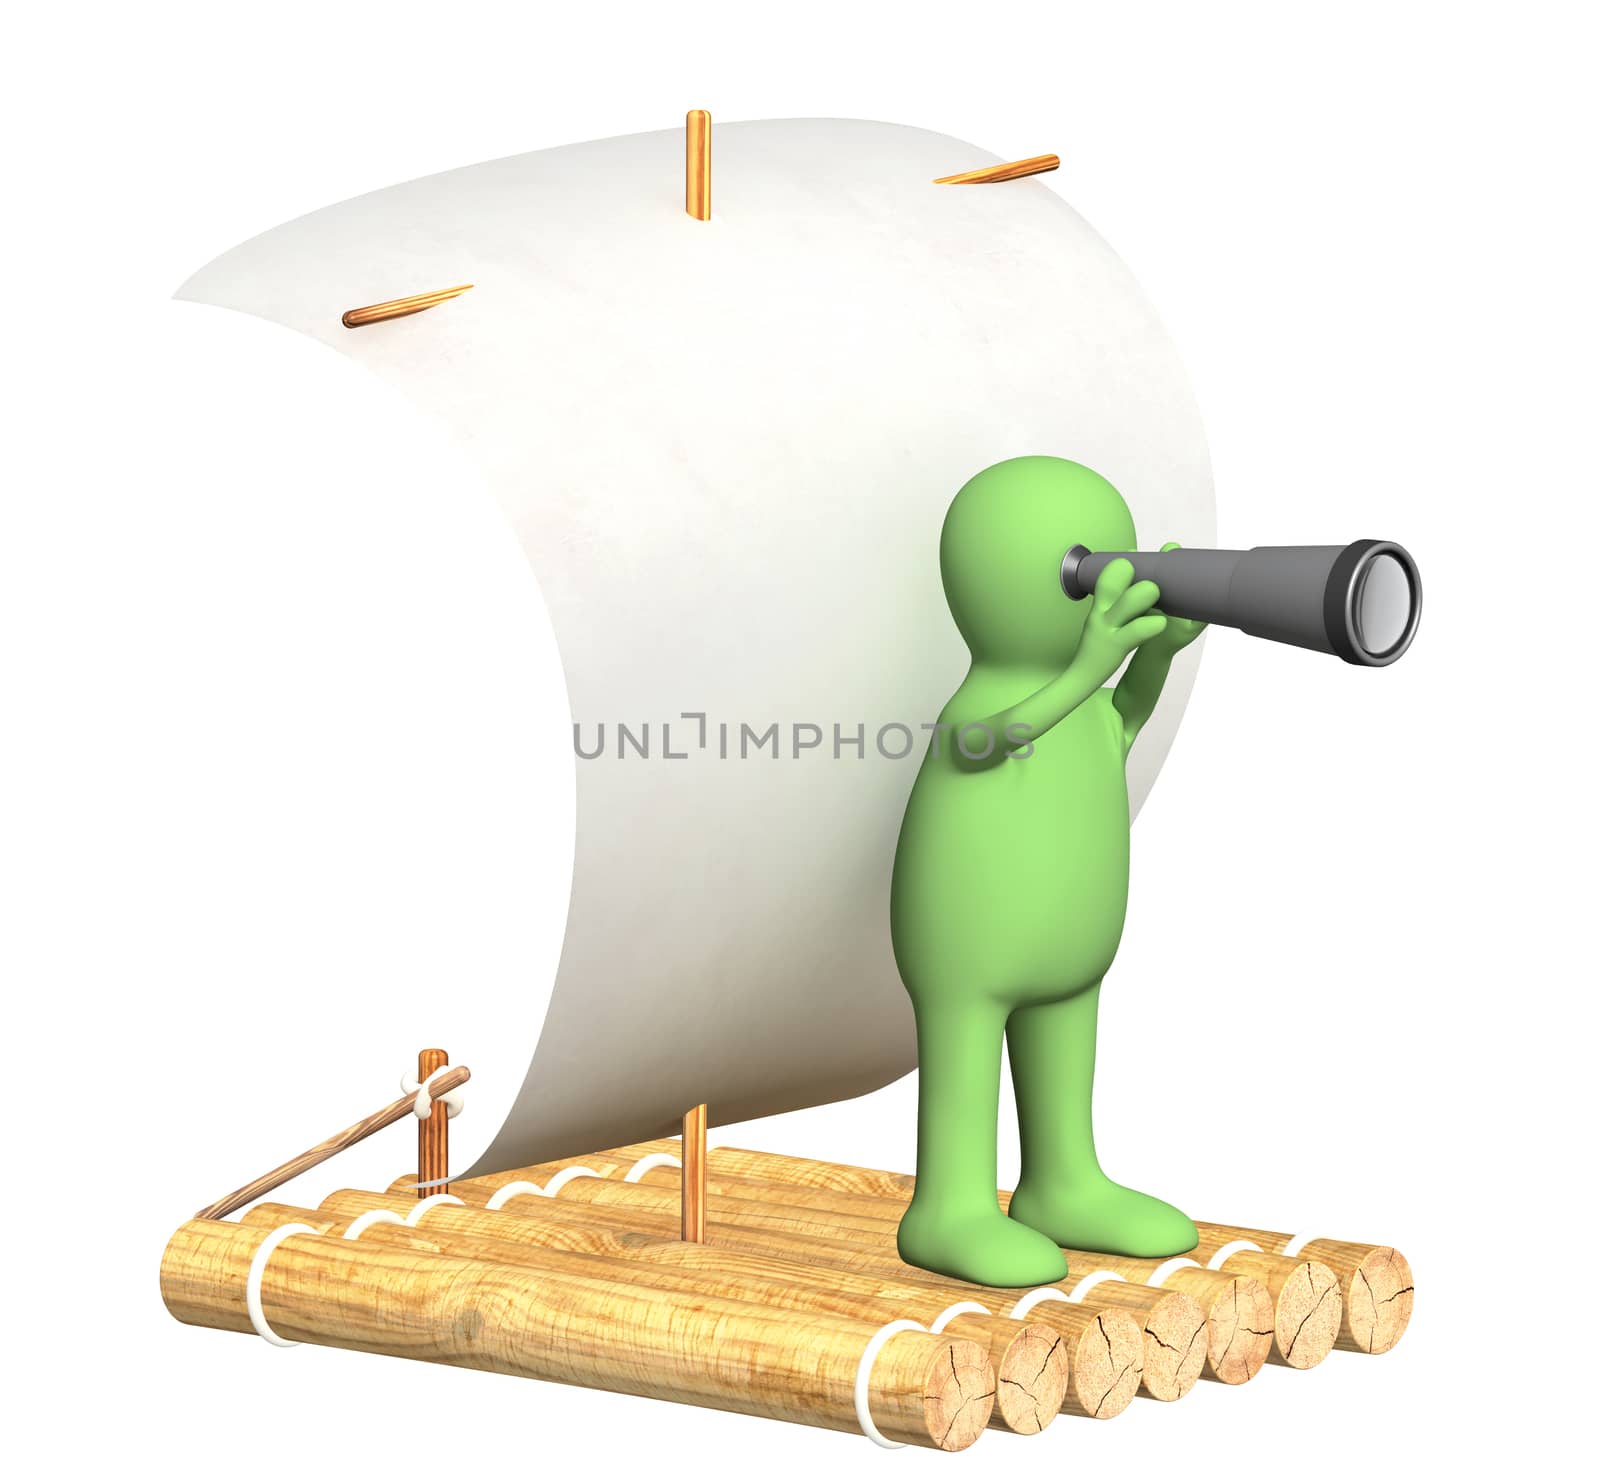 Puppet with spyglass on wooden raft. Isolated over white